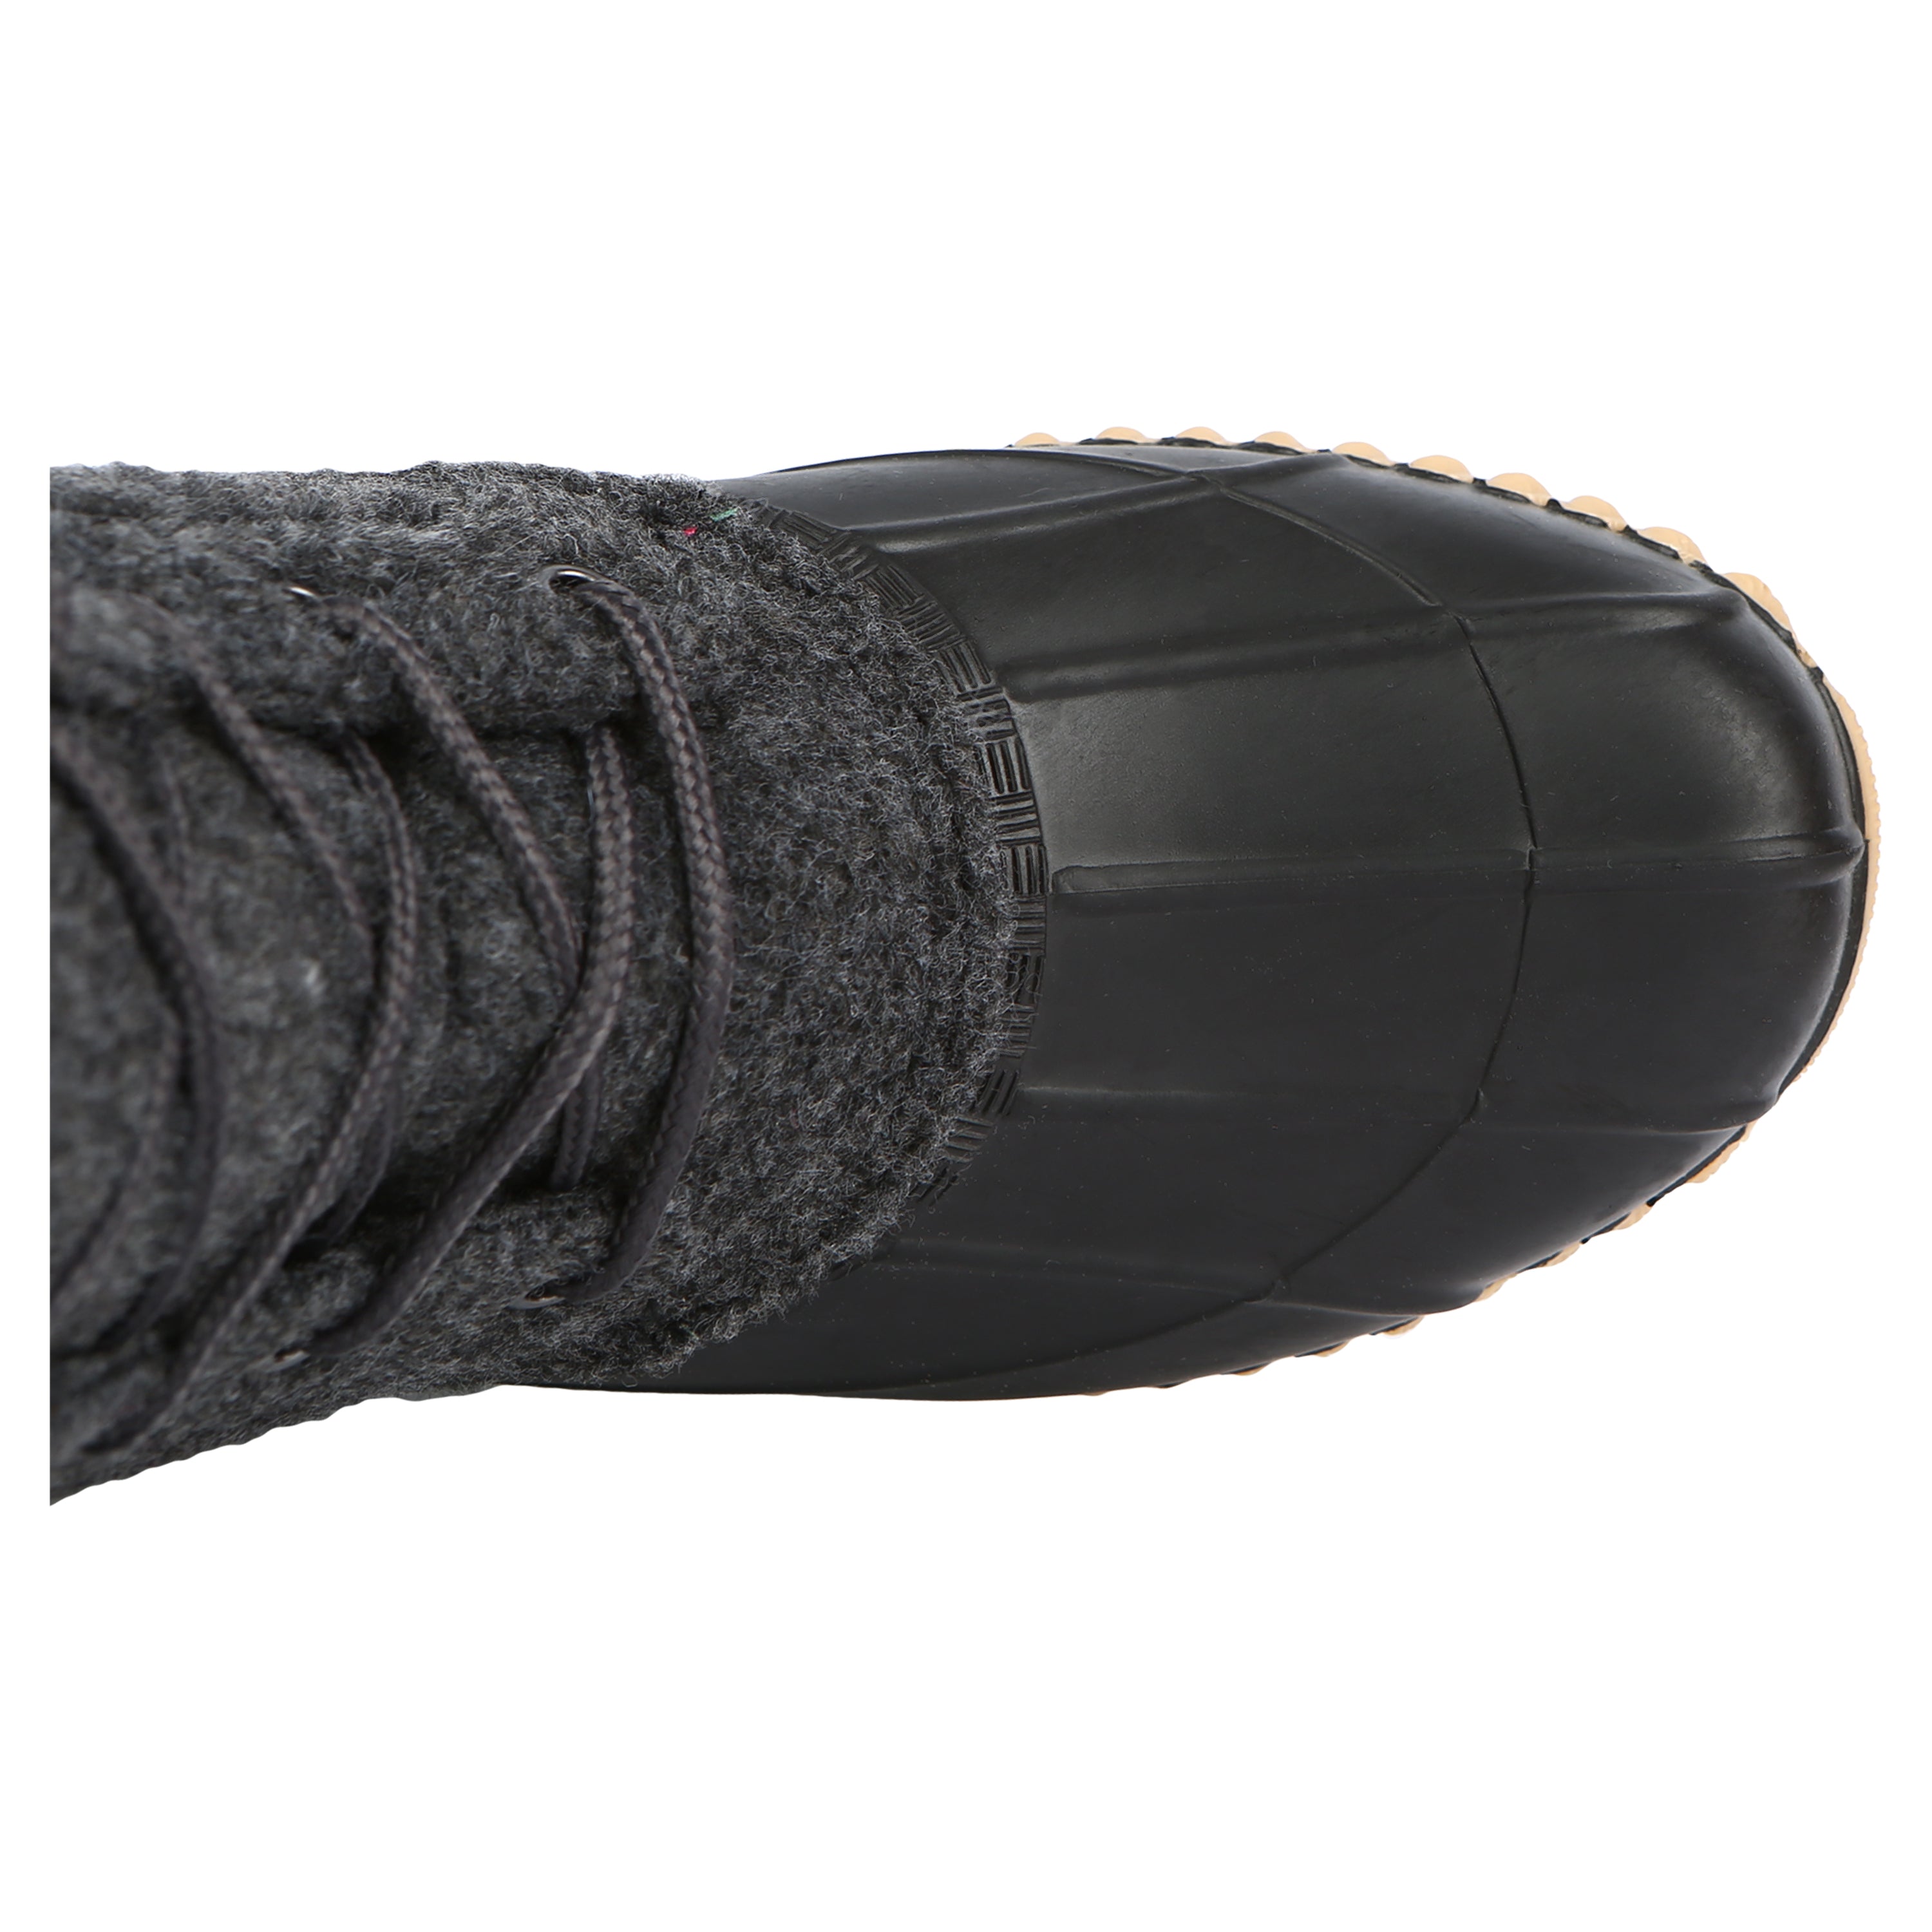 Women's Sutton Cold Weather Fashion Boot